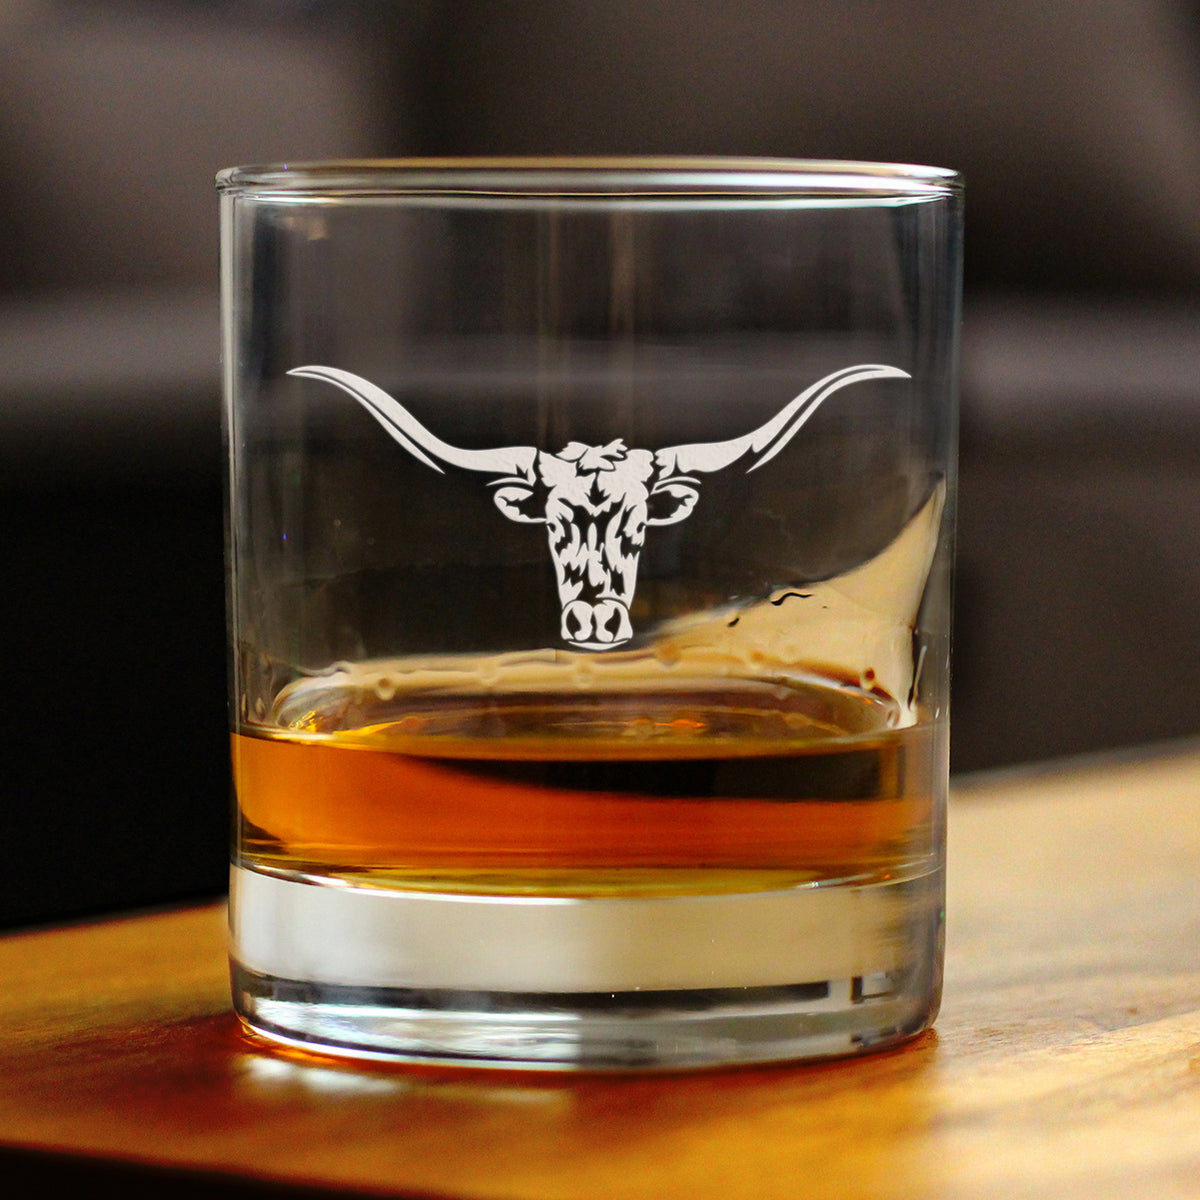 Longhorn Whiskey Rocks Glass - Western Themed Farm Decor and Gifts for Texan Ranchers - 10.25 Oz Glasses